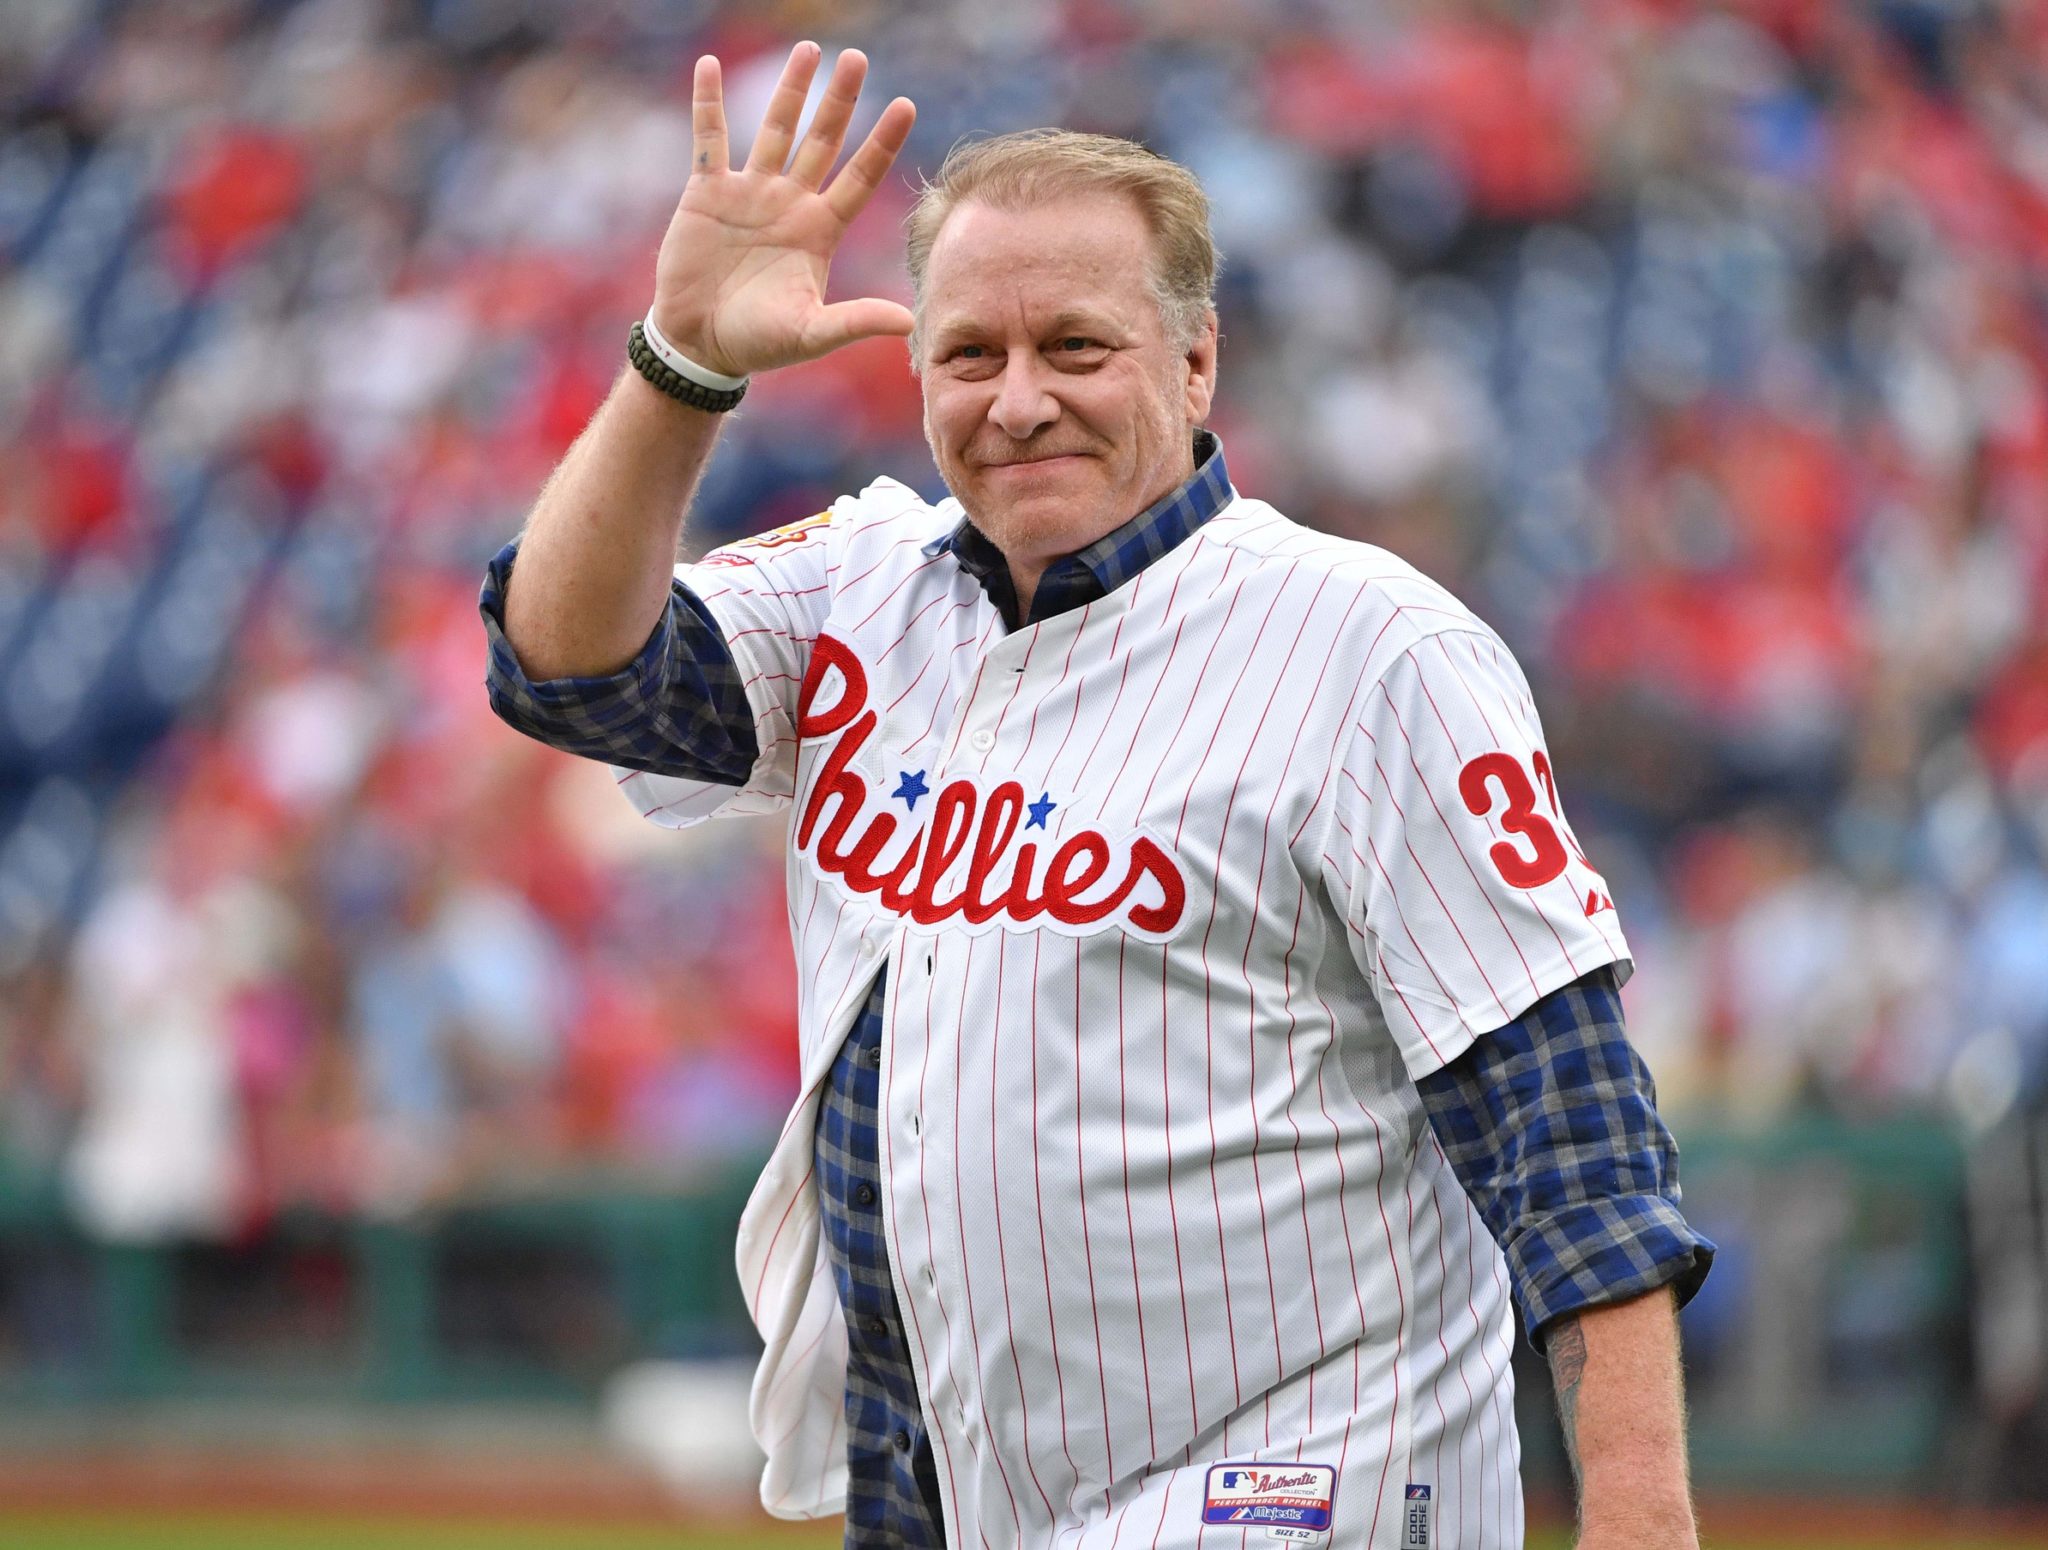 Jack McCaffery Snubs Curt Schilling, Votes for Rollins and Howard in Widely-Panned Hall of Fame Ballot